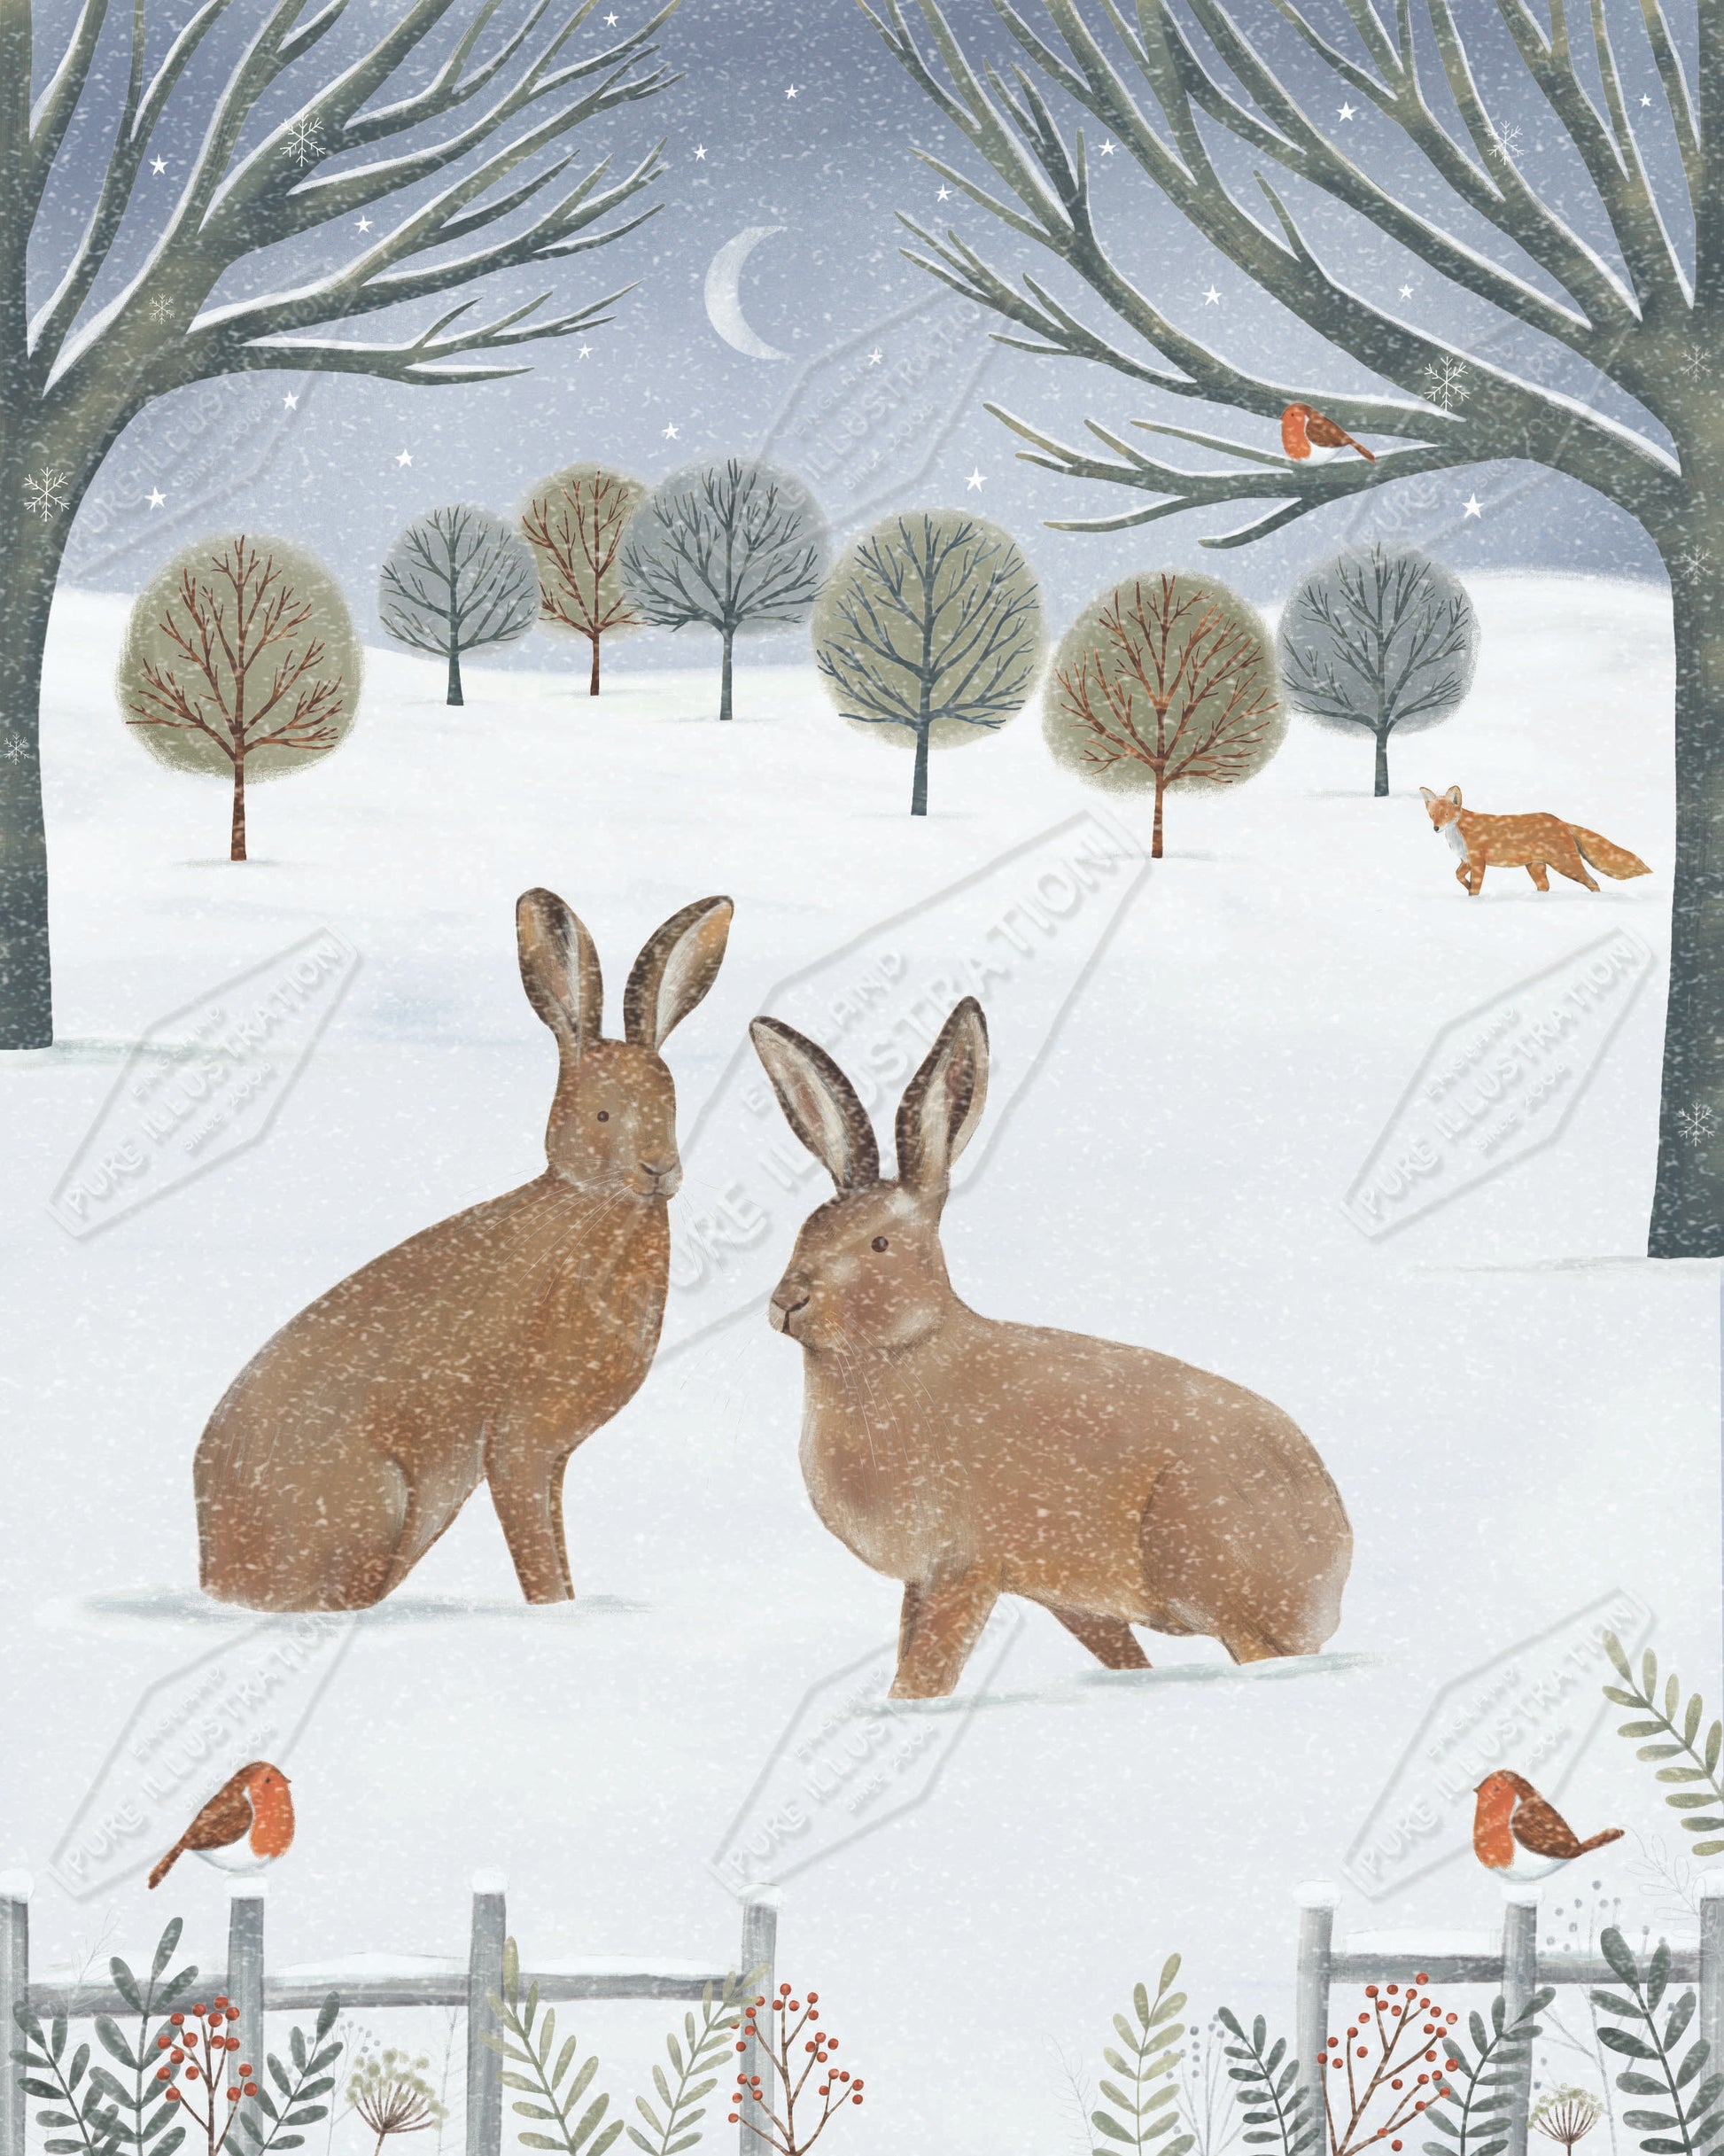 00035603AAI - Anna Aitken is represented by Pure Art Licensing Agency - Christmas Greeting Card Design